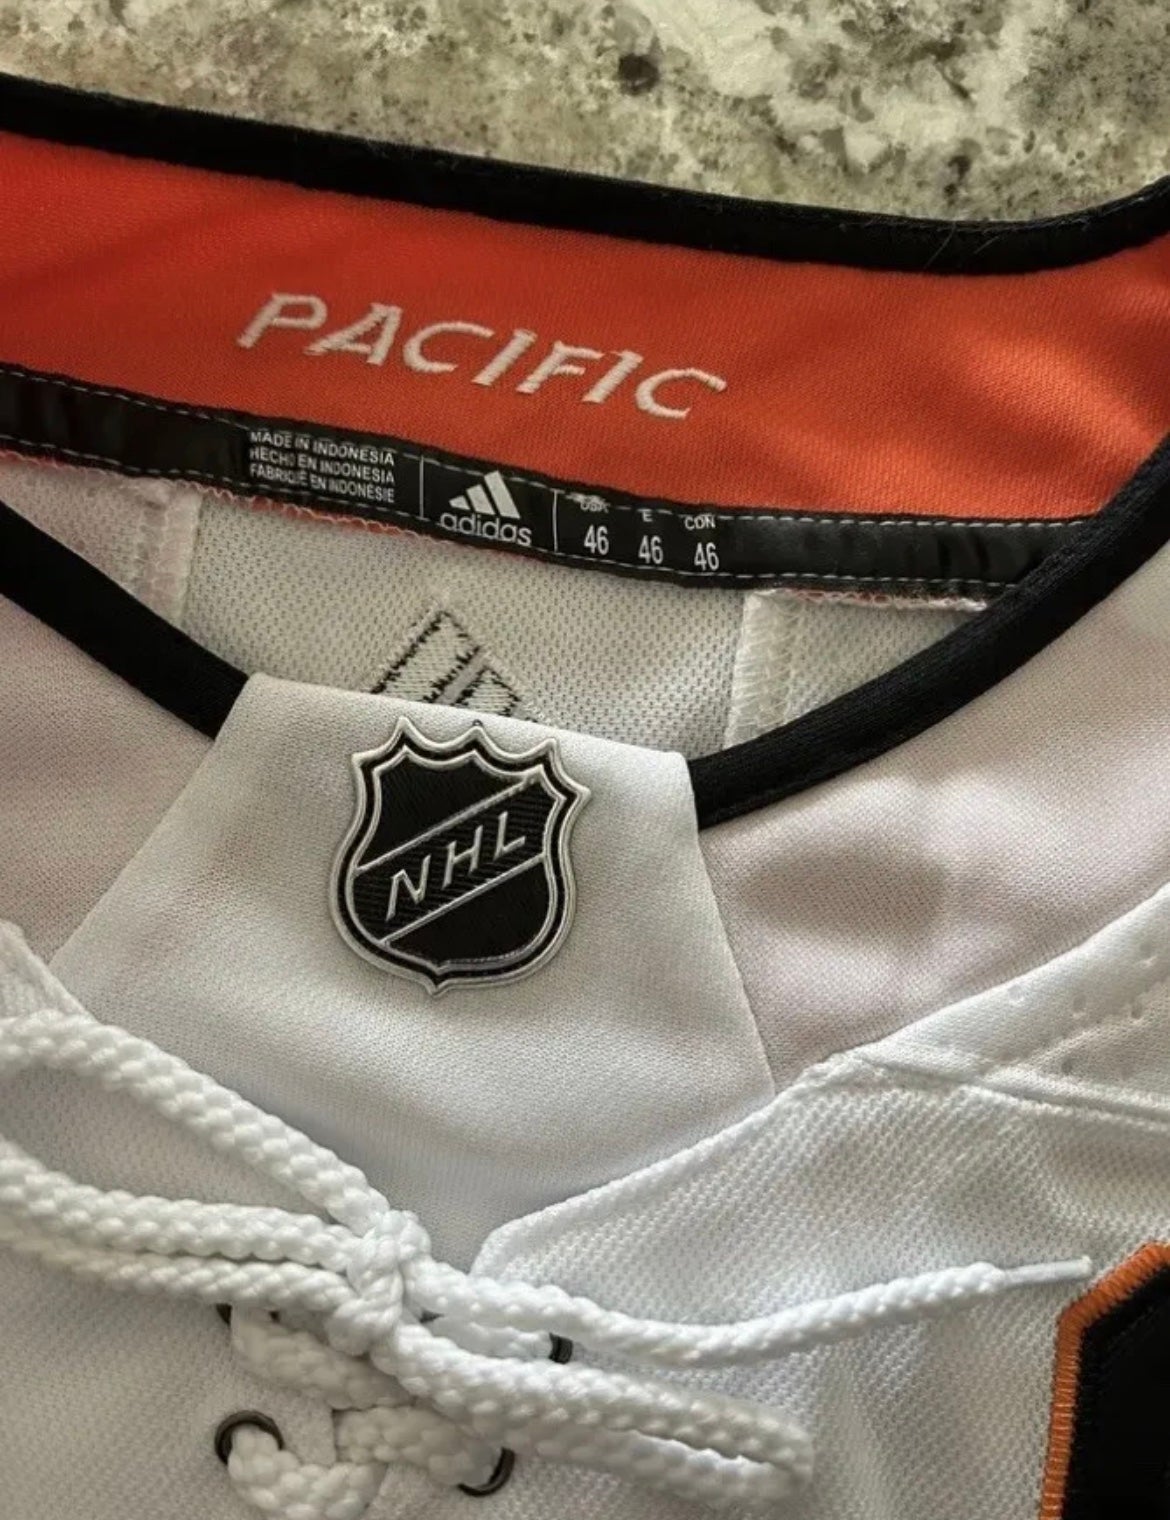 Connor McDavid Edmonton Oilers Game-Used 2018 All-Star Game Jersey